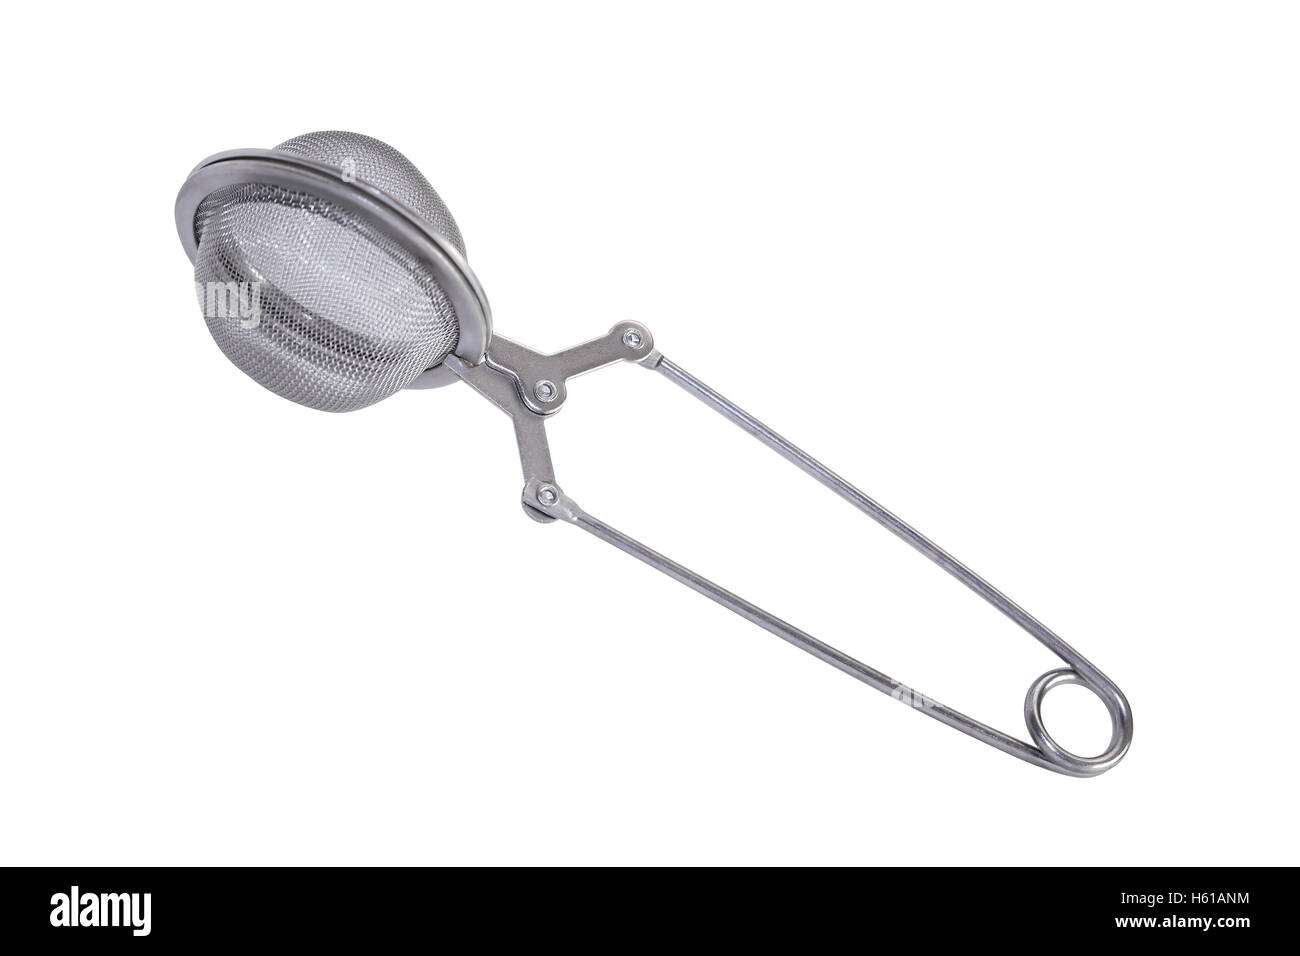 New contemporary tea-strainer on white background. Isolated with clipping path Stock Photo